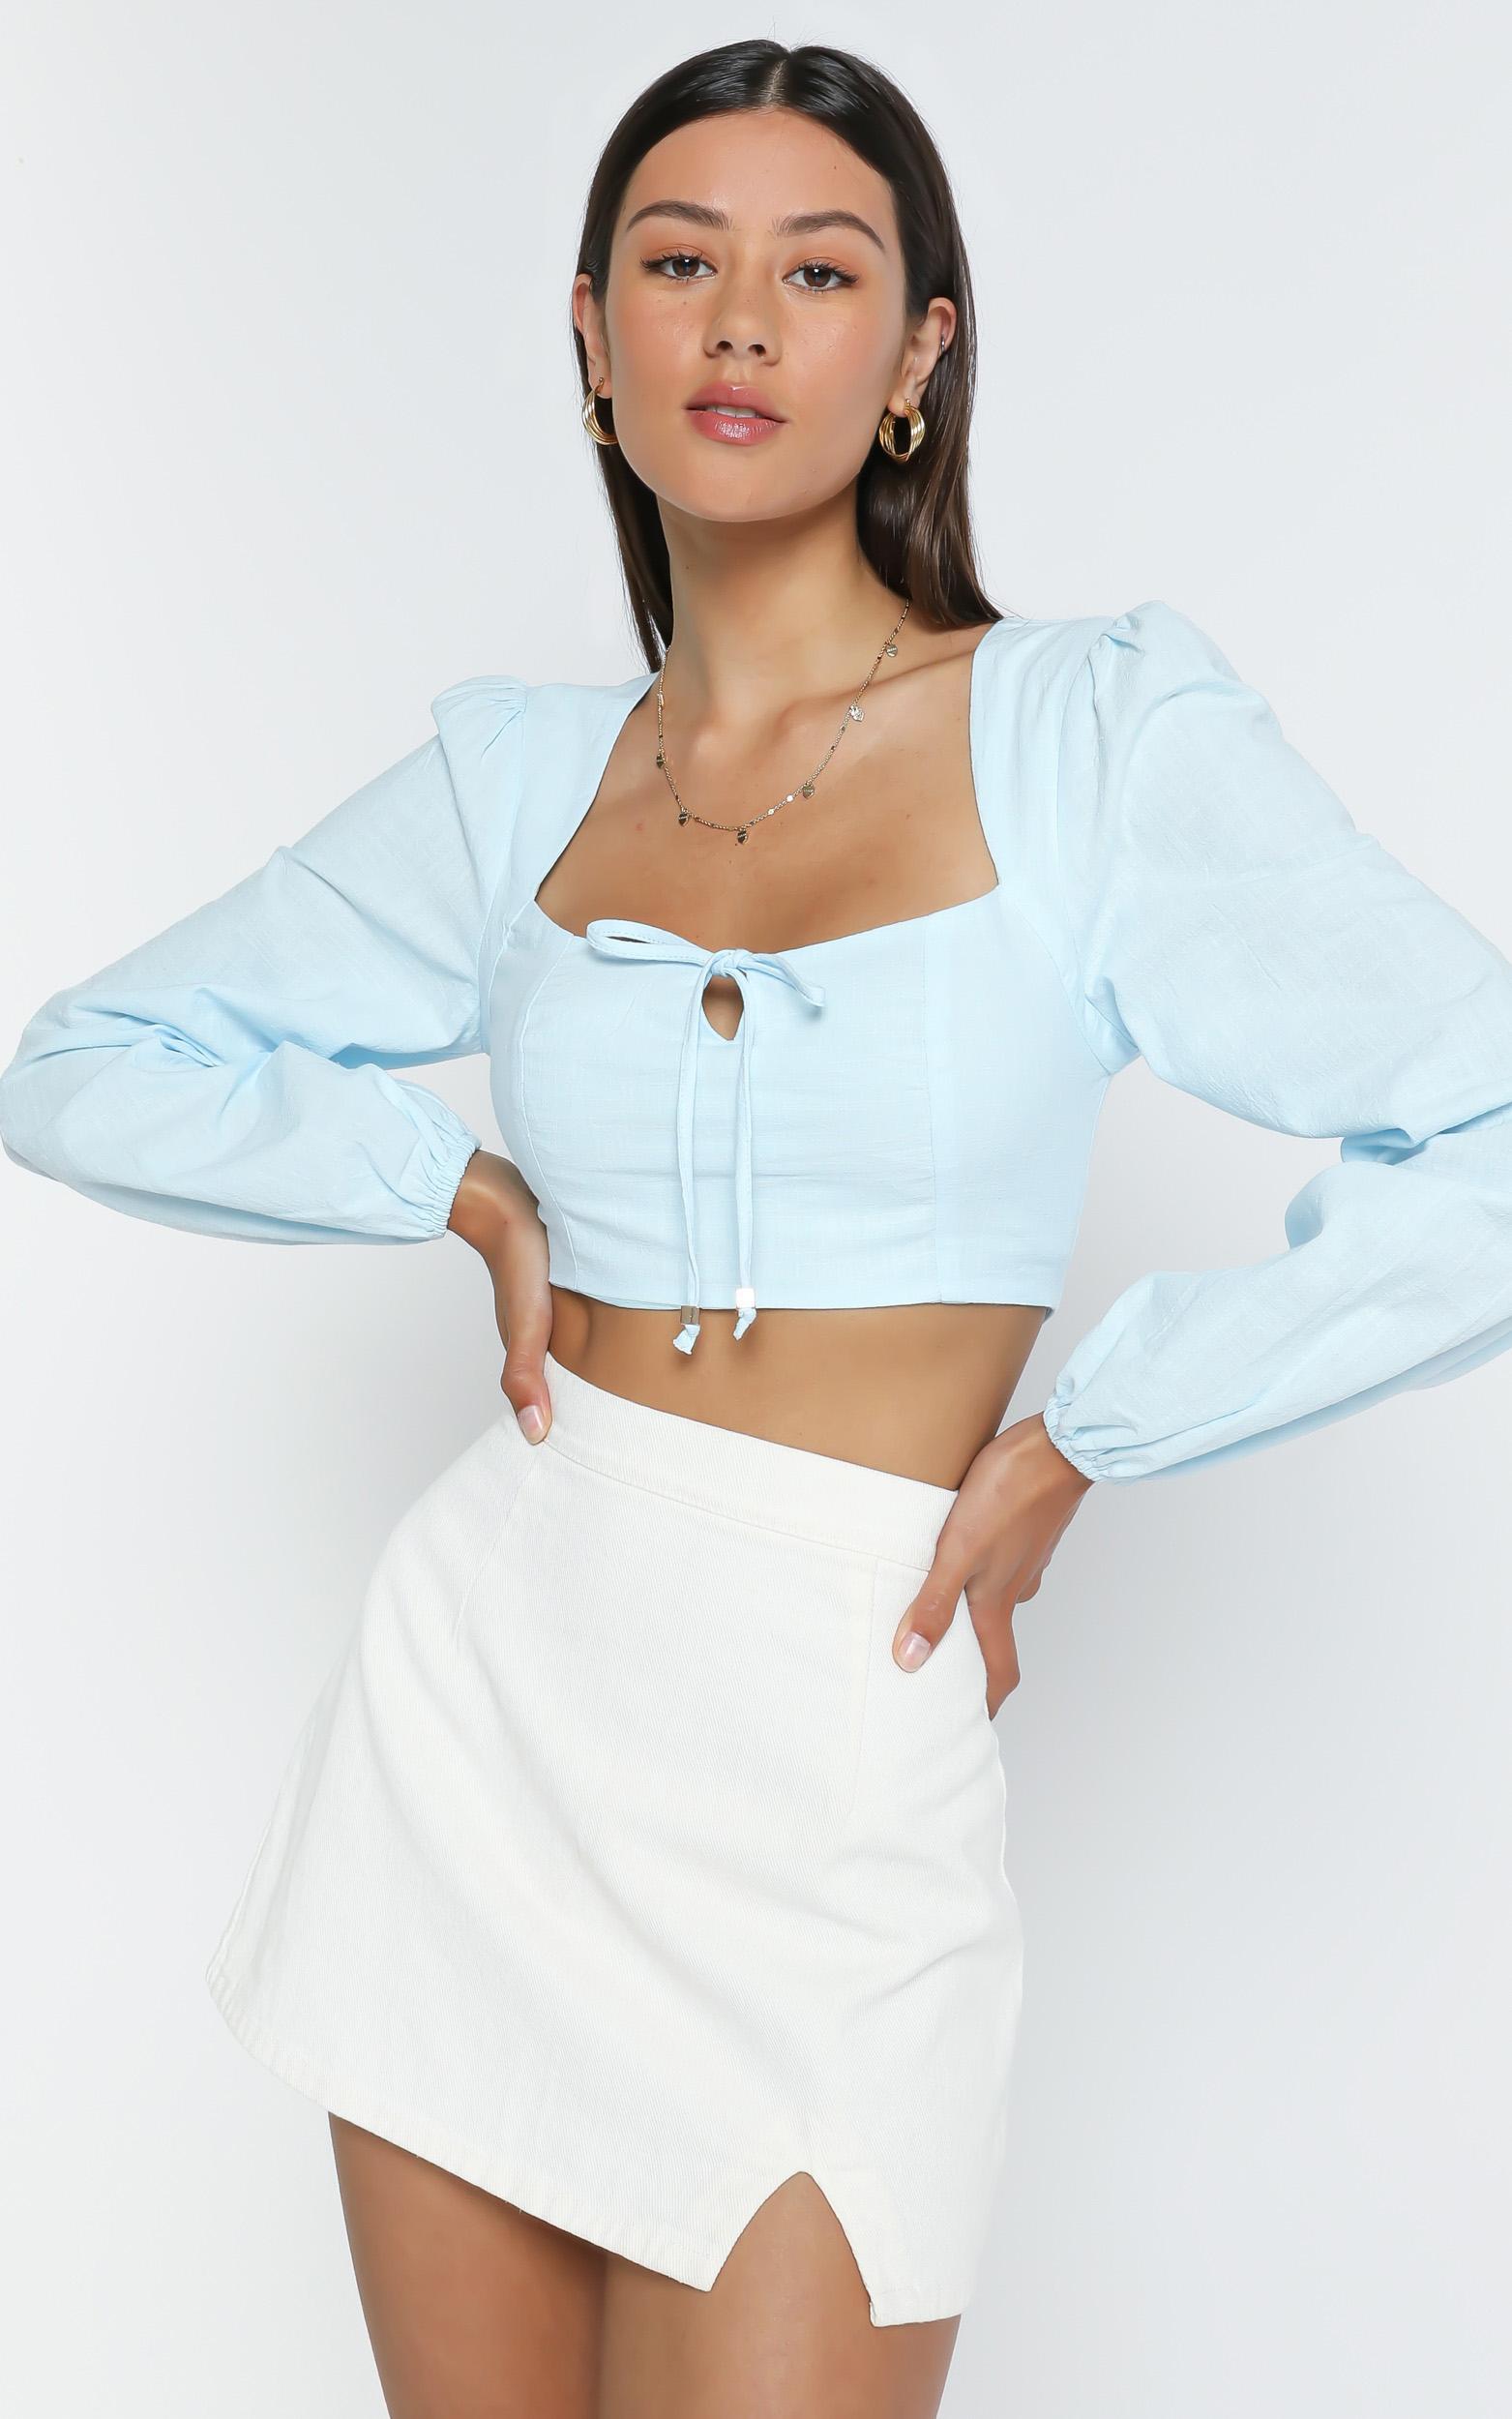 Claes Top in Blue Linen Look - 6 (XS), Blue, hi-res image number null